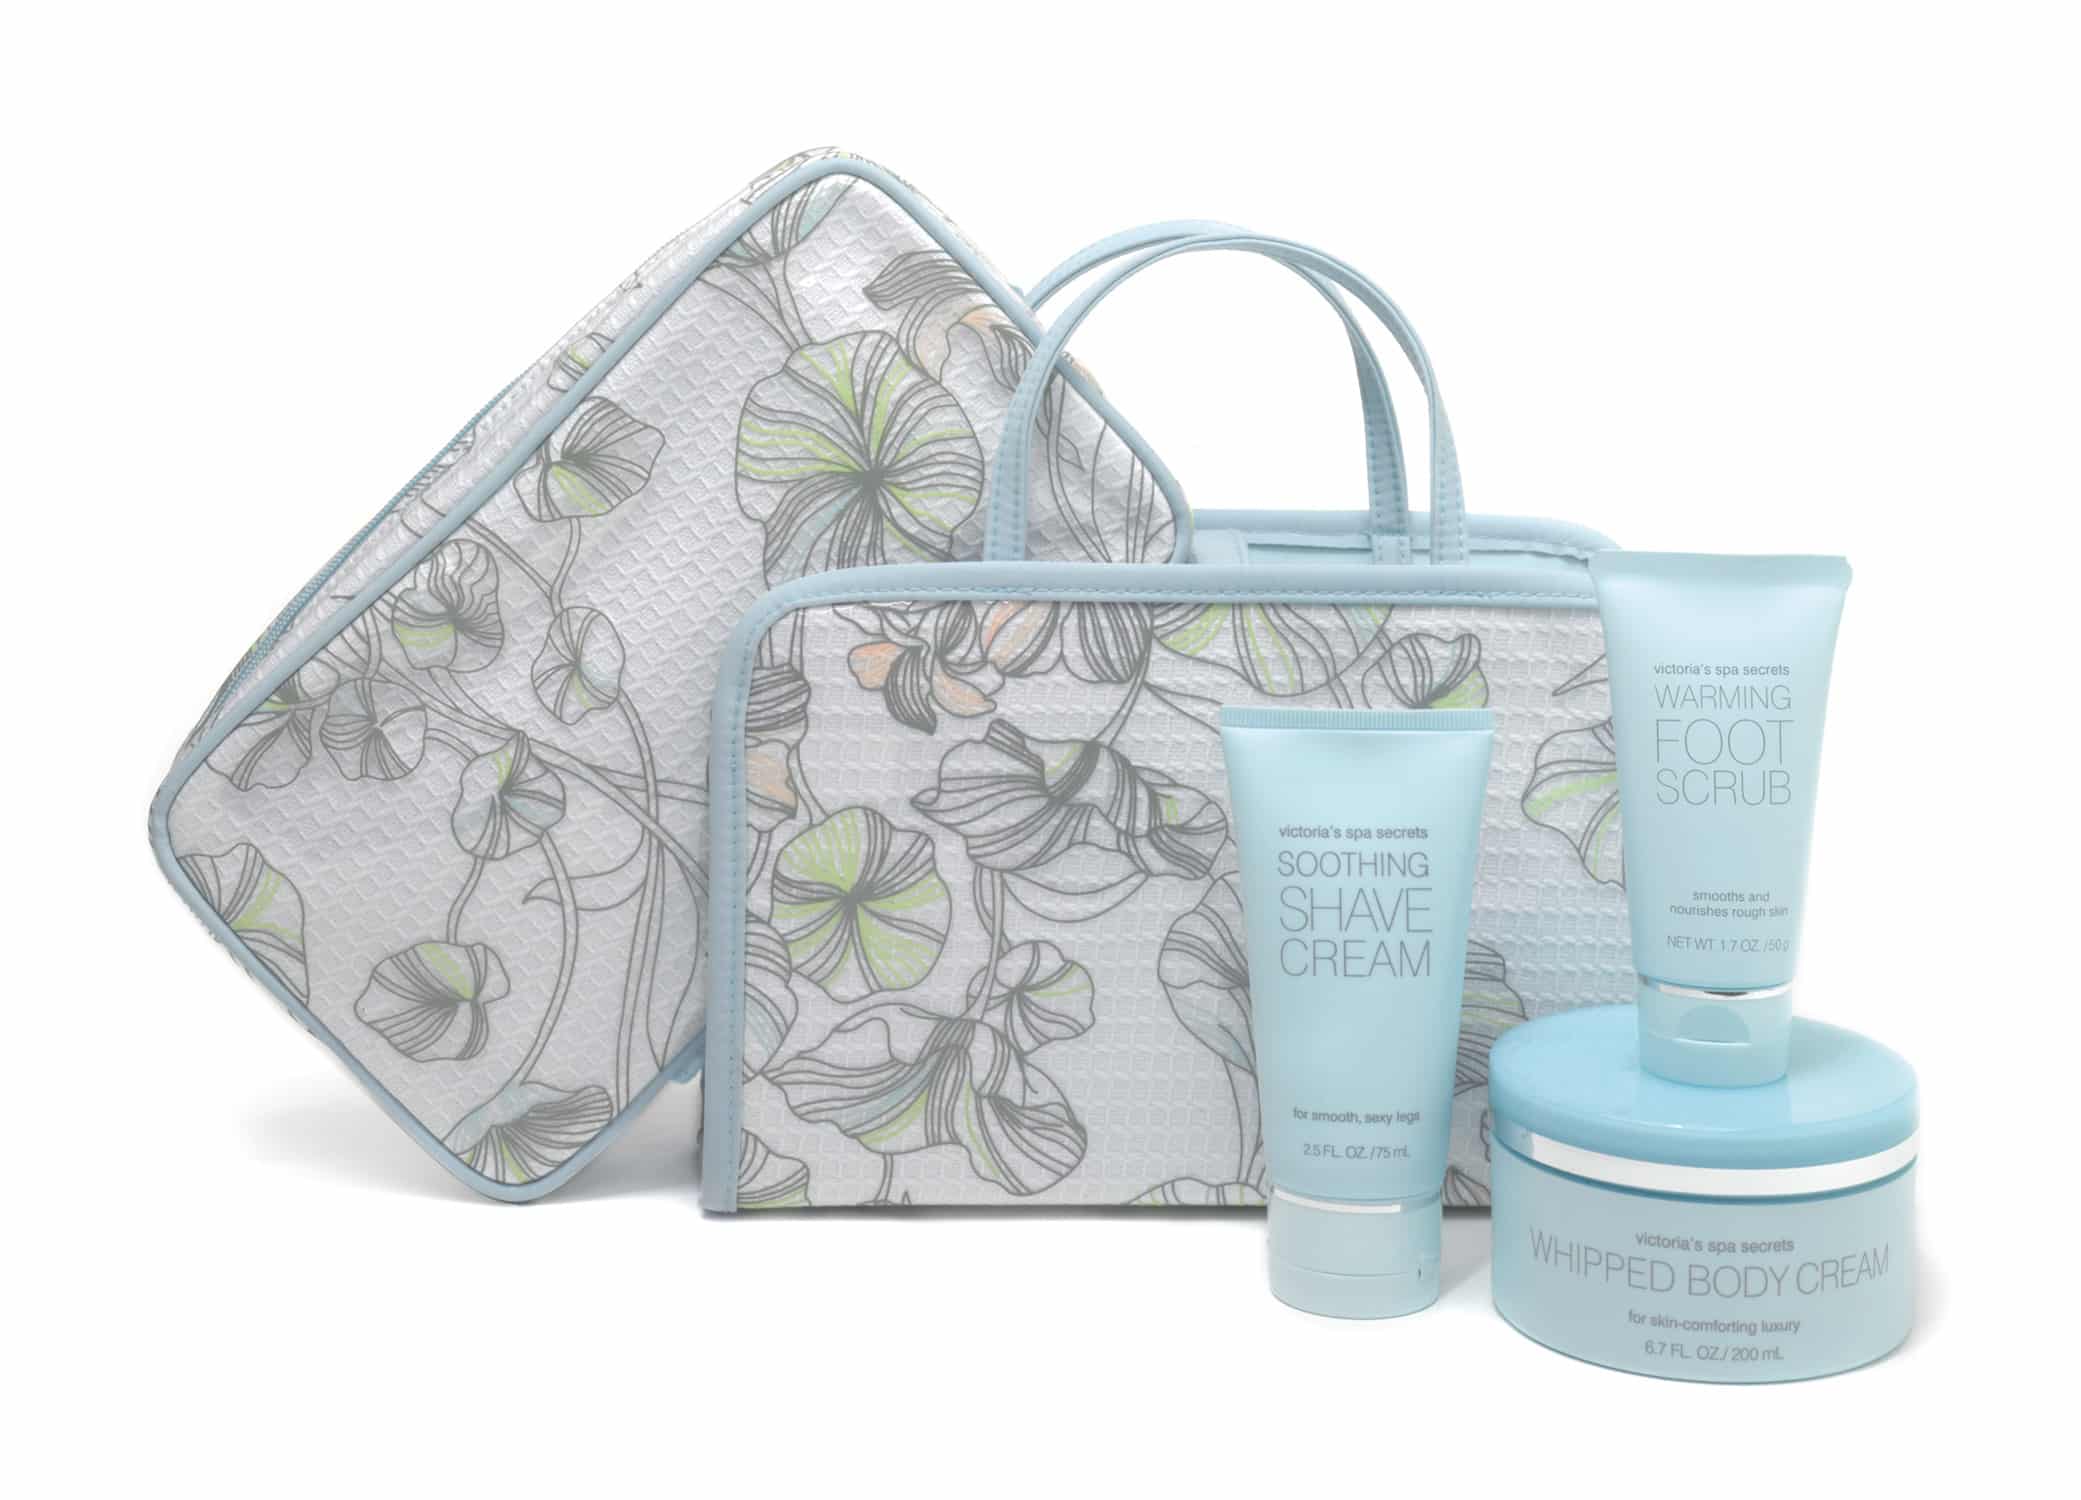 Gift bag design for Victoria's Secret Spa Secrets showcasing light blue lotions and pouches with floral designs.